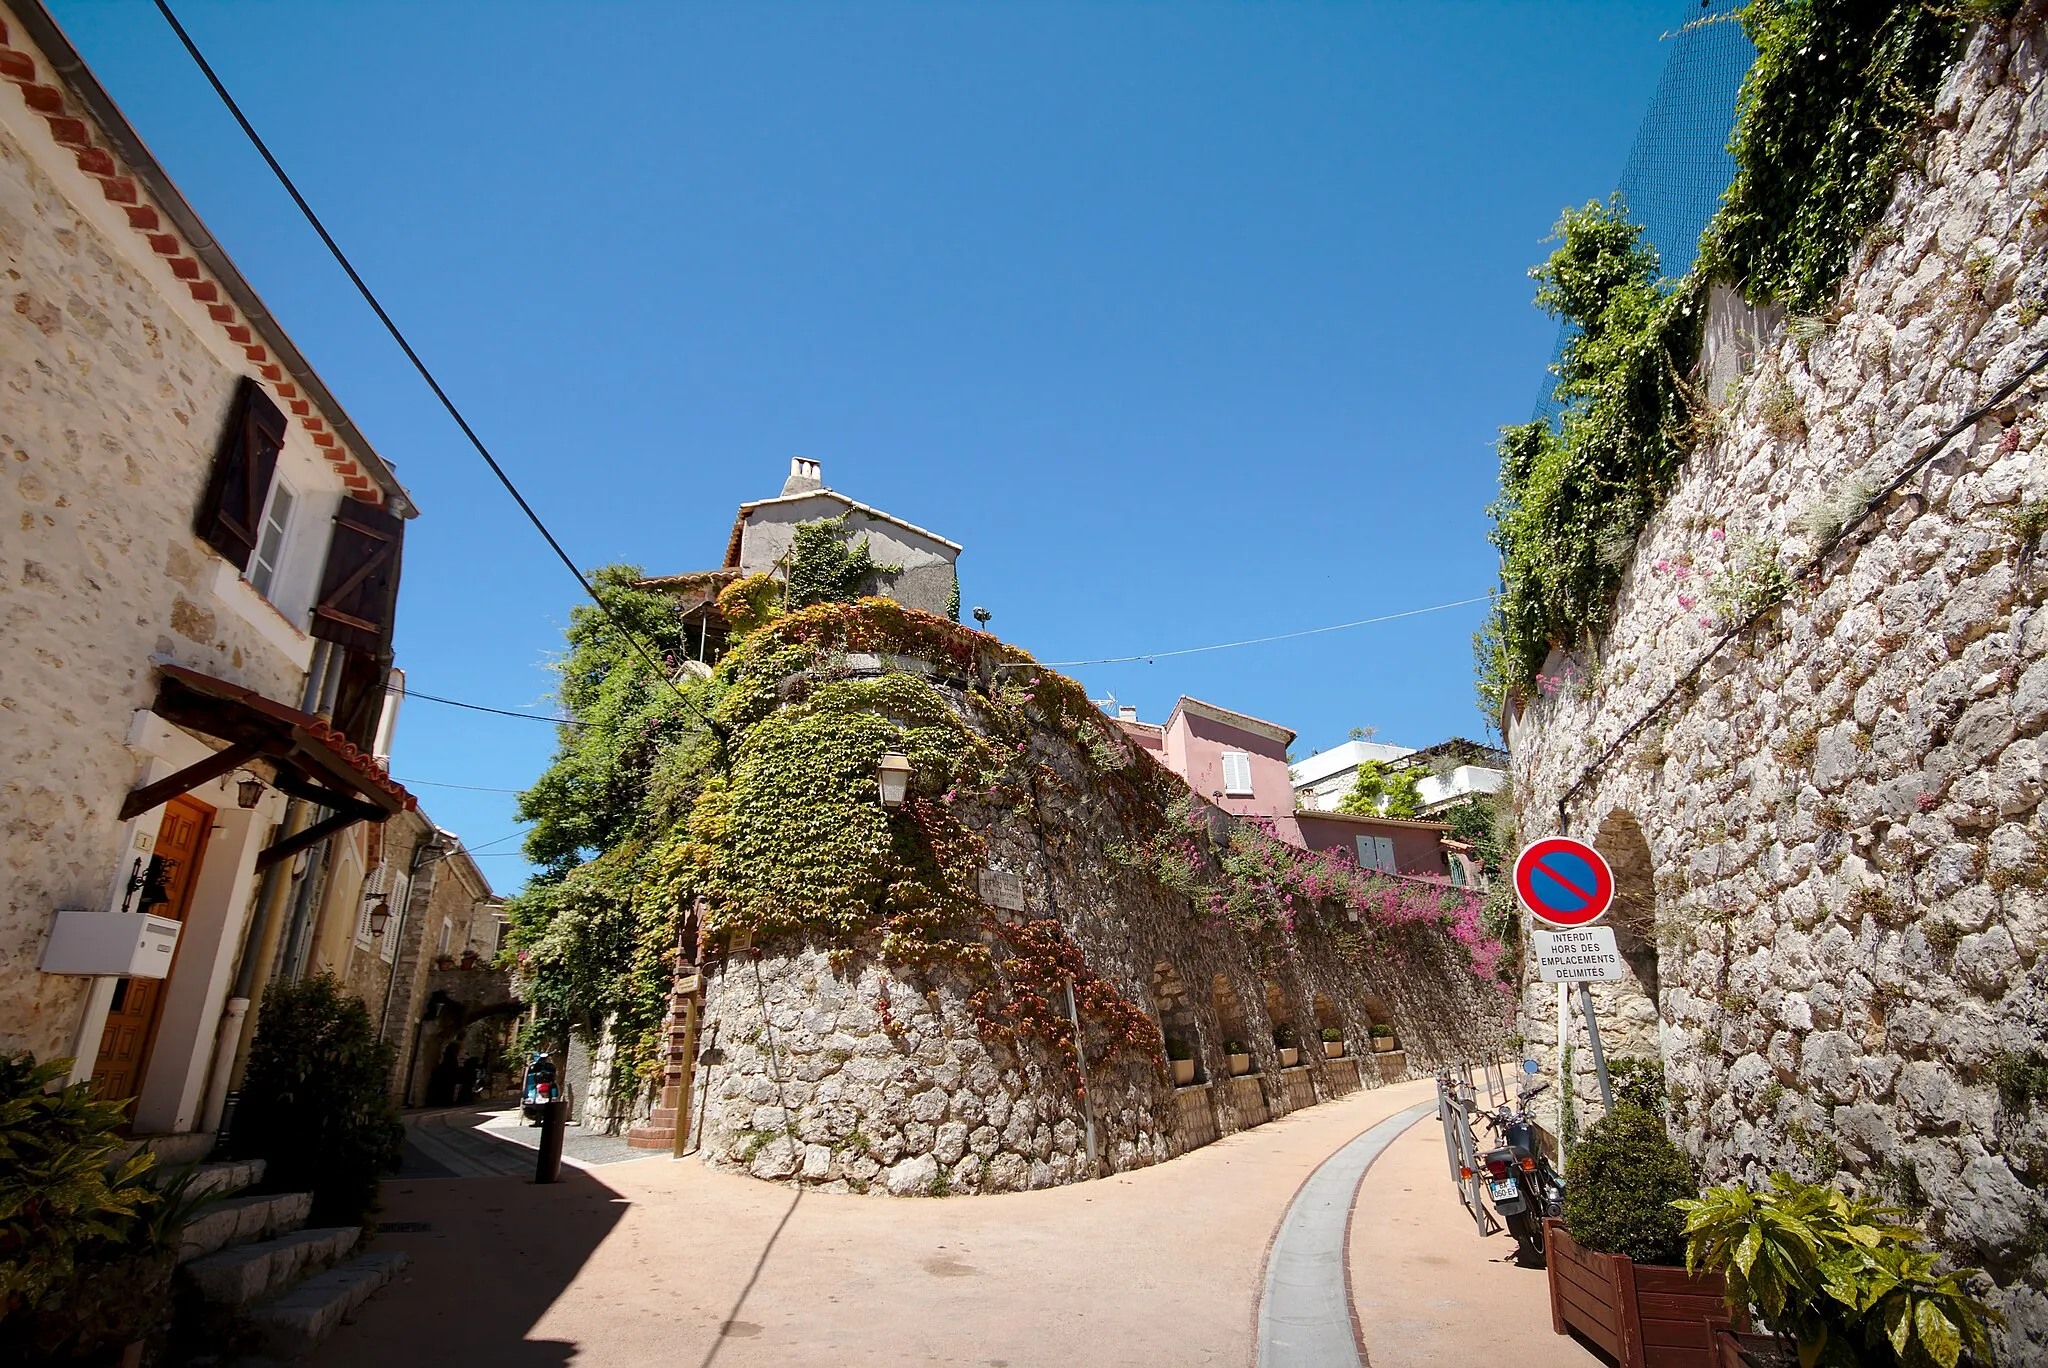 Photo showing: Main street leading to the heart of the fortified village of Aspremont, Alpes Maritimes, France